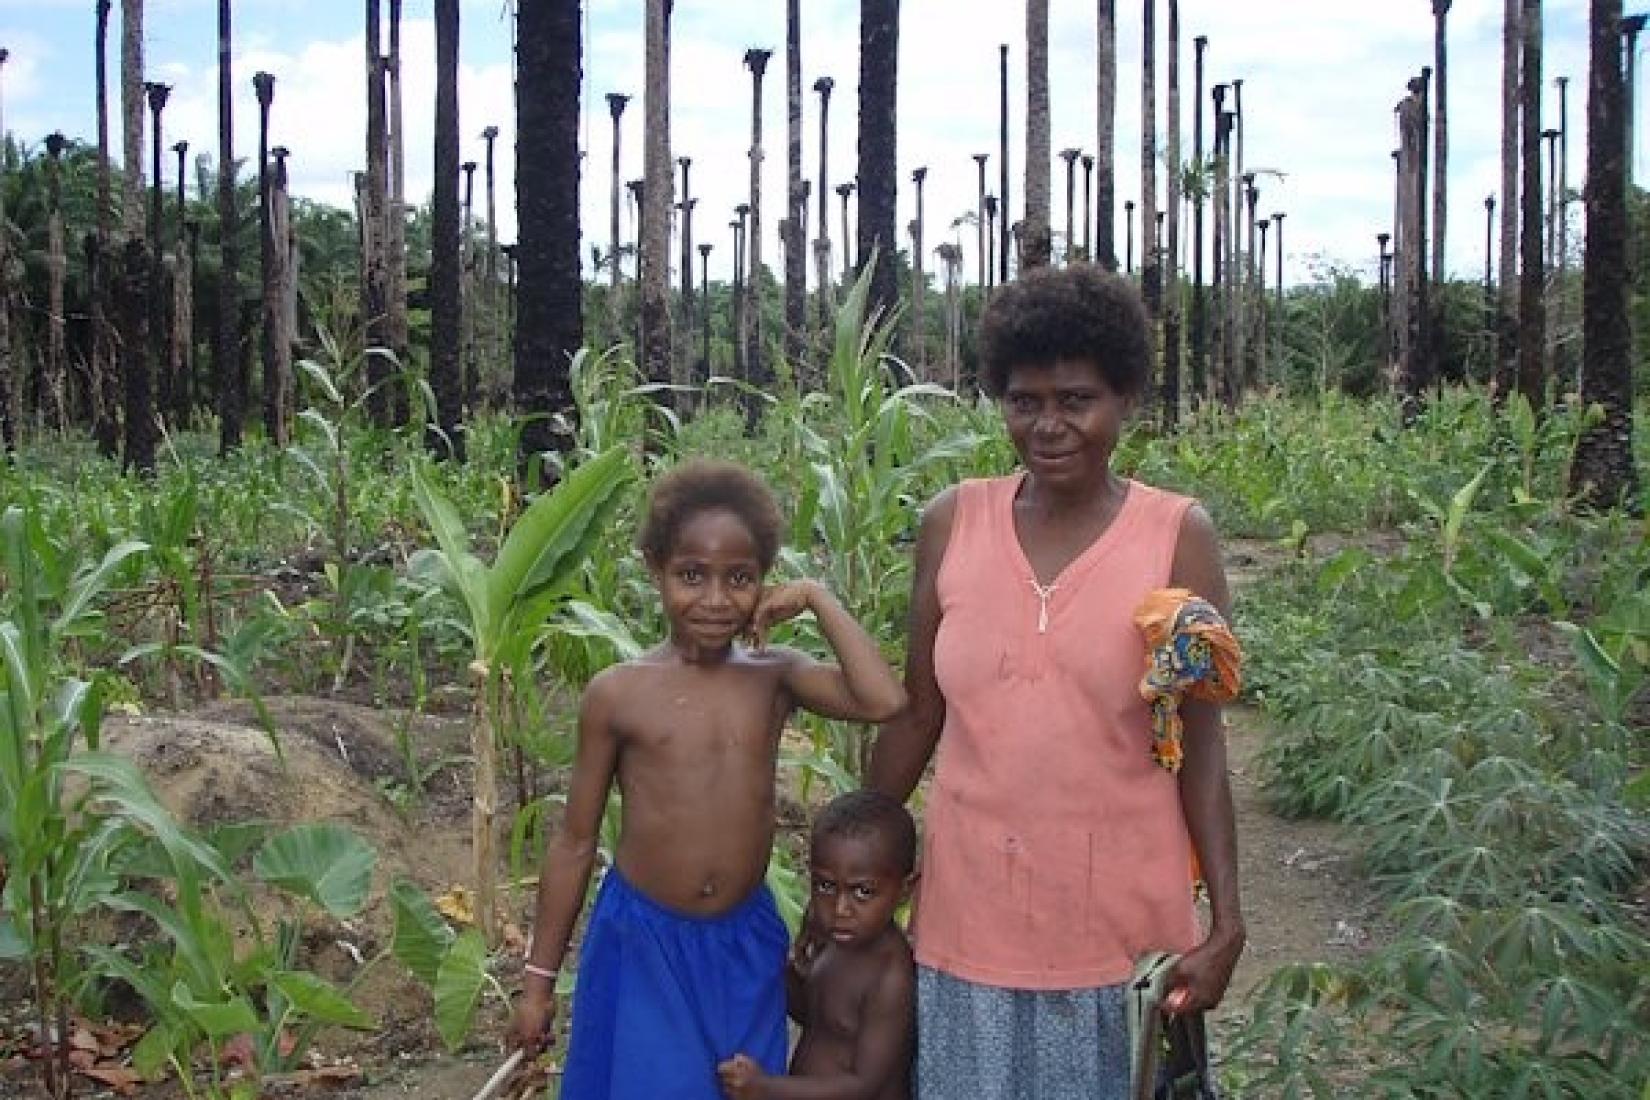 A smallholder family on their land in Papua New Guinea. Image: George Curry